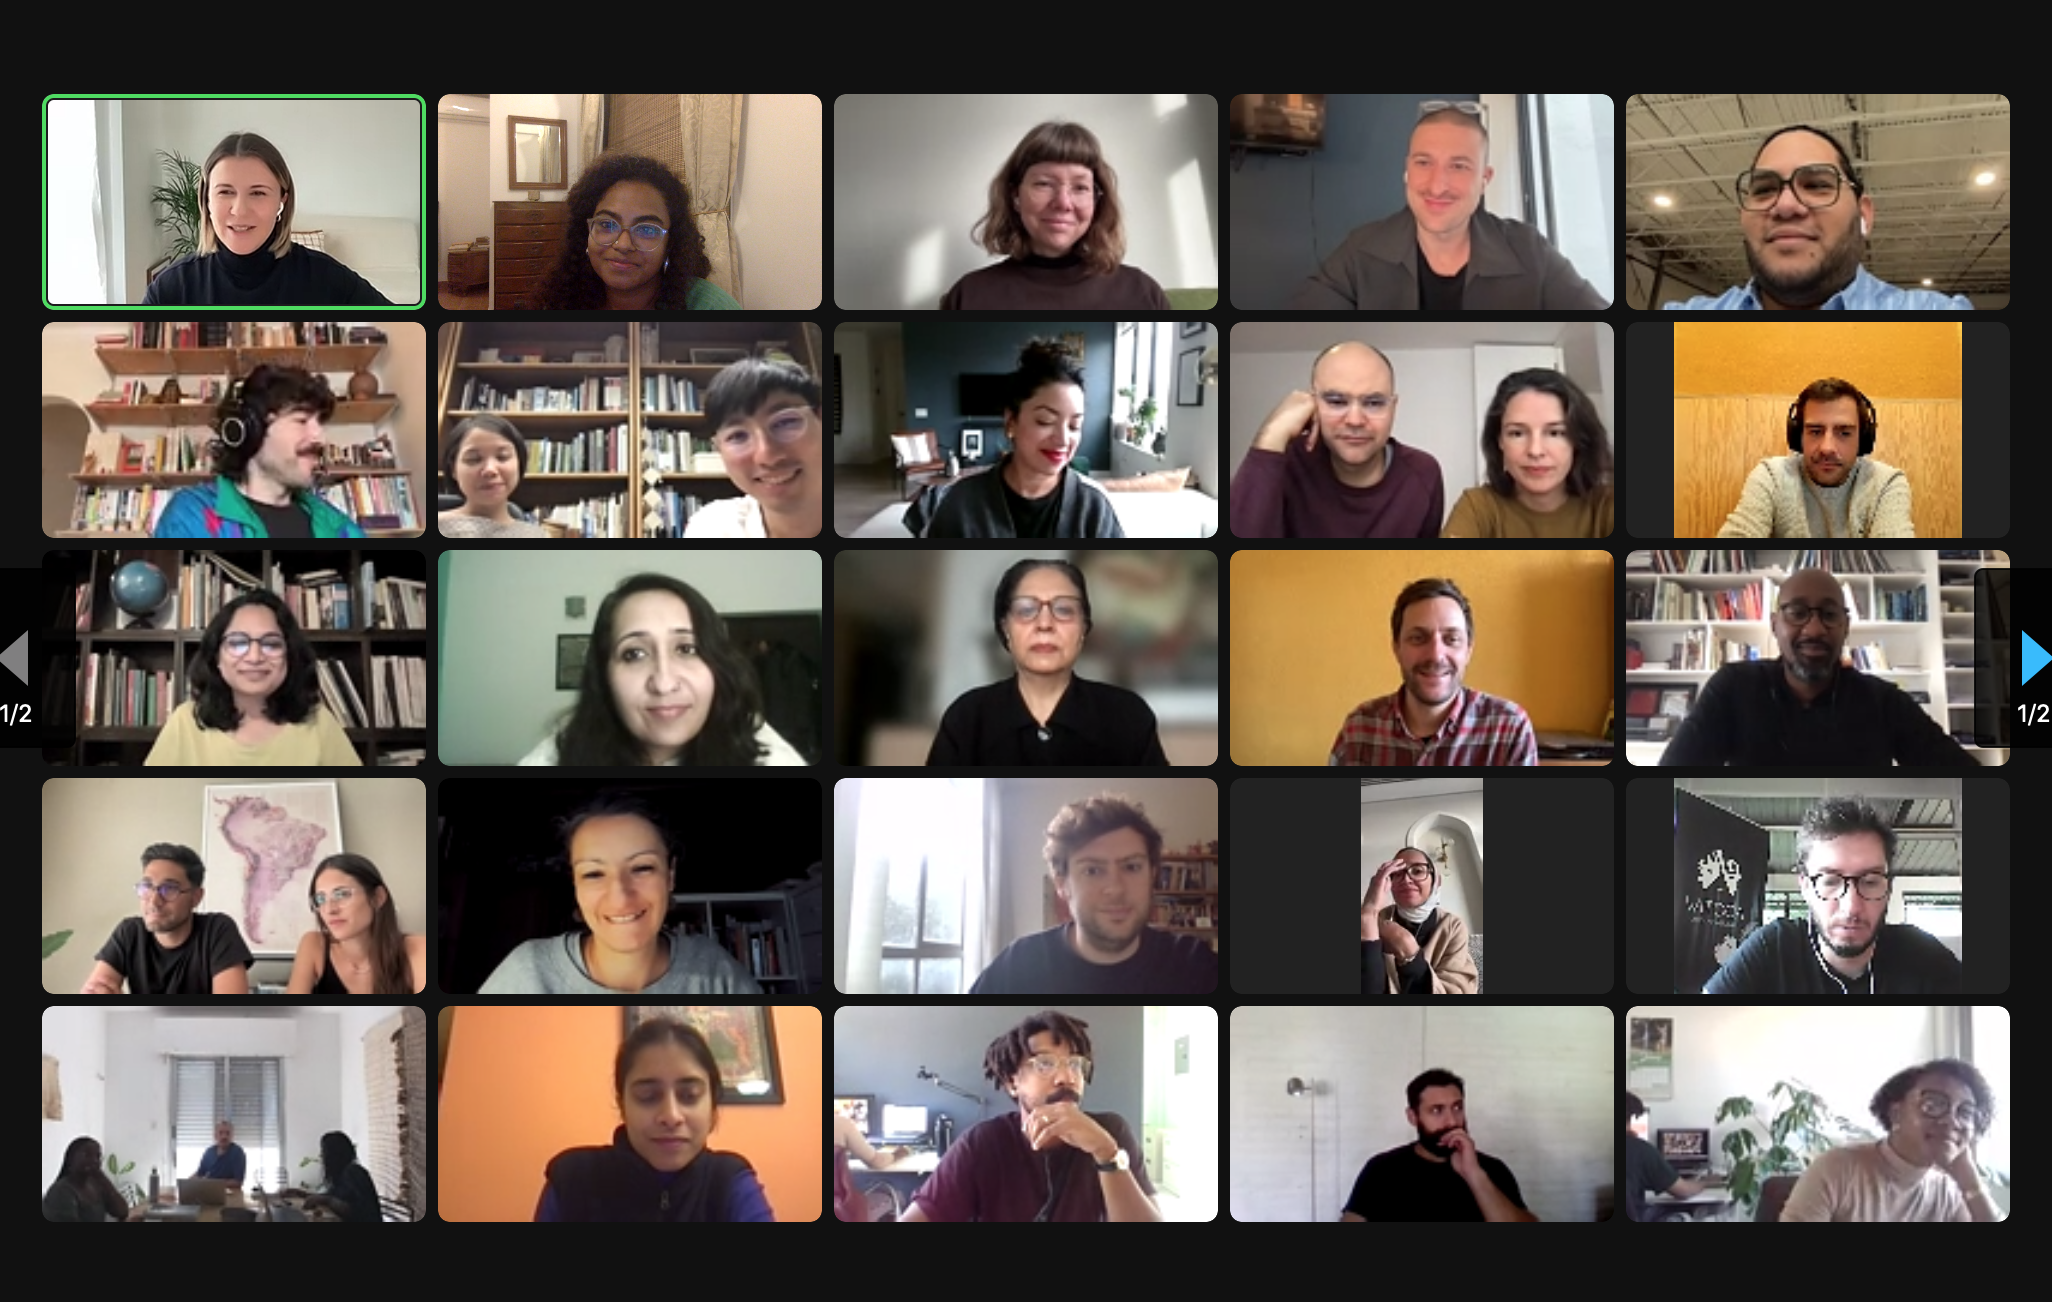 Our first online meeting with the cohort where we presented our practice and projects